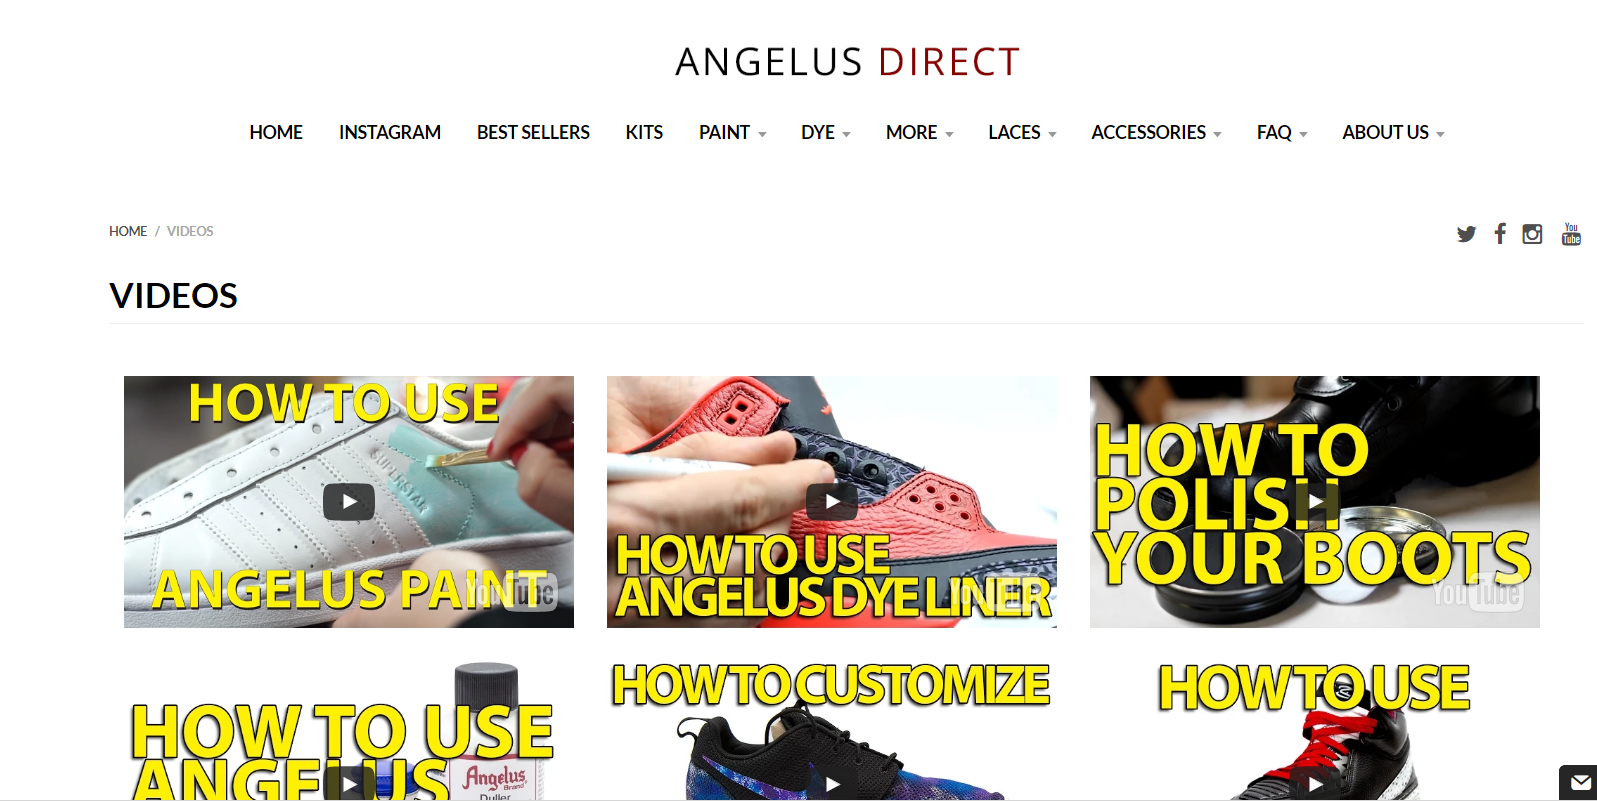 The Do's & Don'ts of Using Angelus Duller